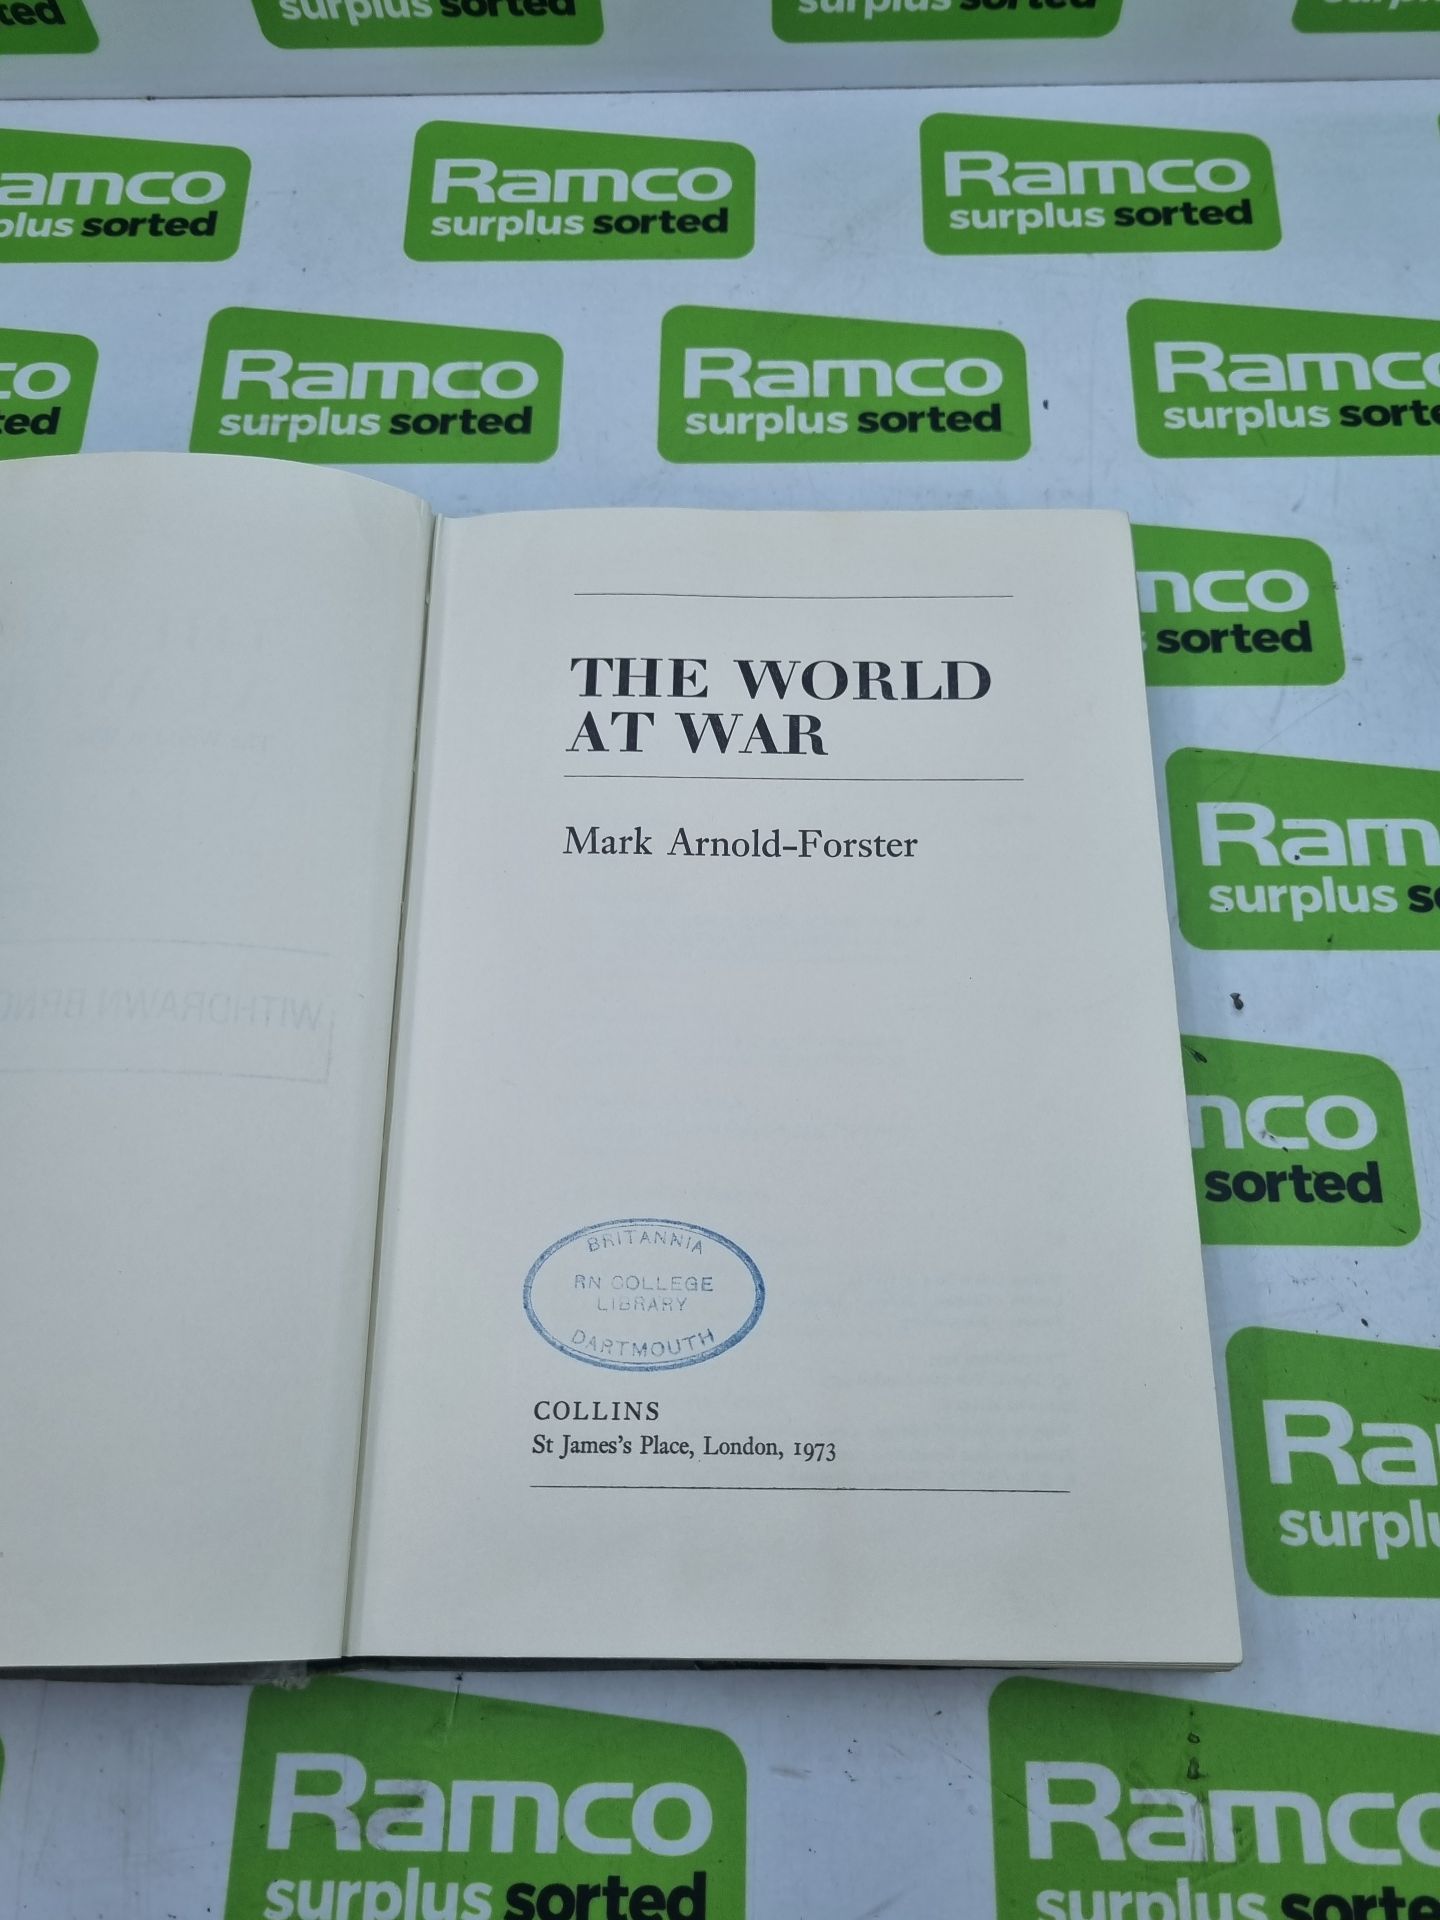 The Great World War 1914-45 Volume 1 by John Bourne, Peter Liddle and Ian Whitehead - London 2000, T - Image 9 of 16